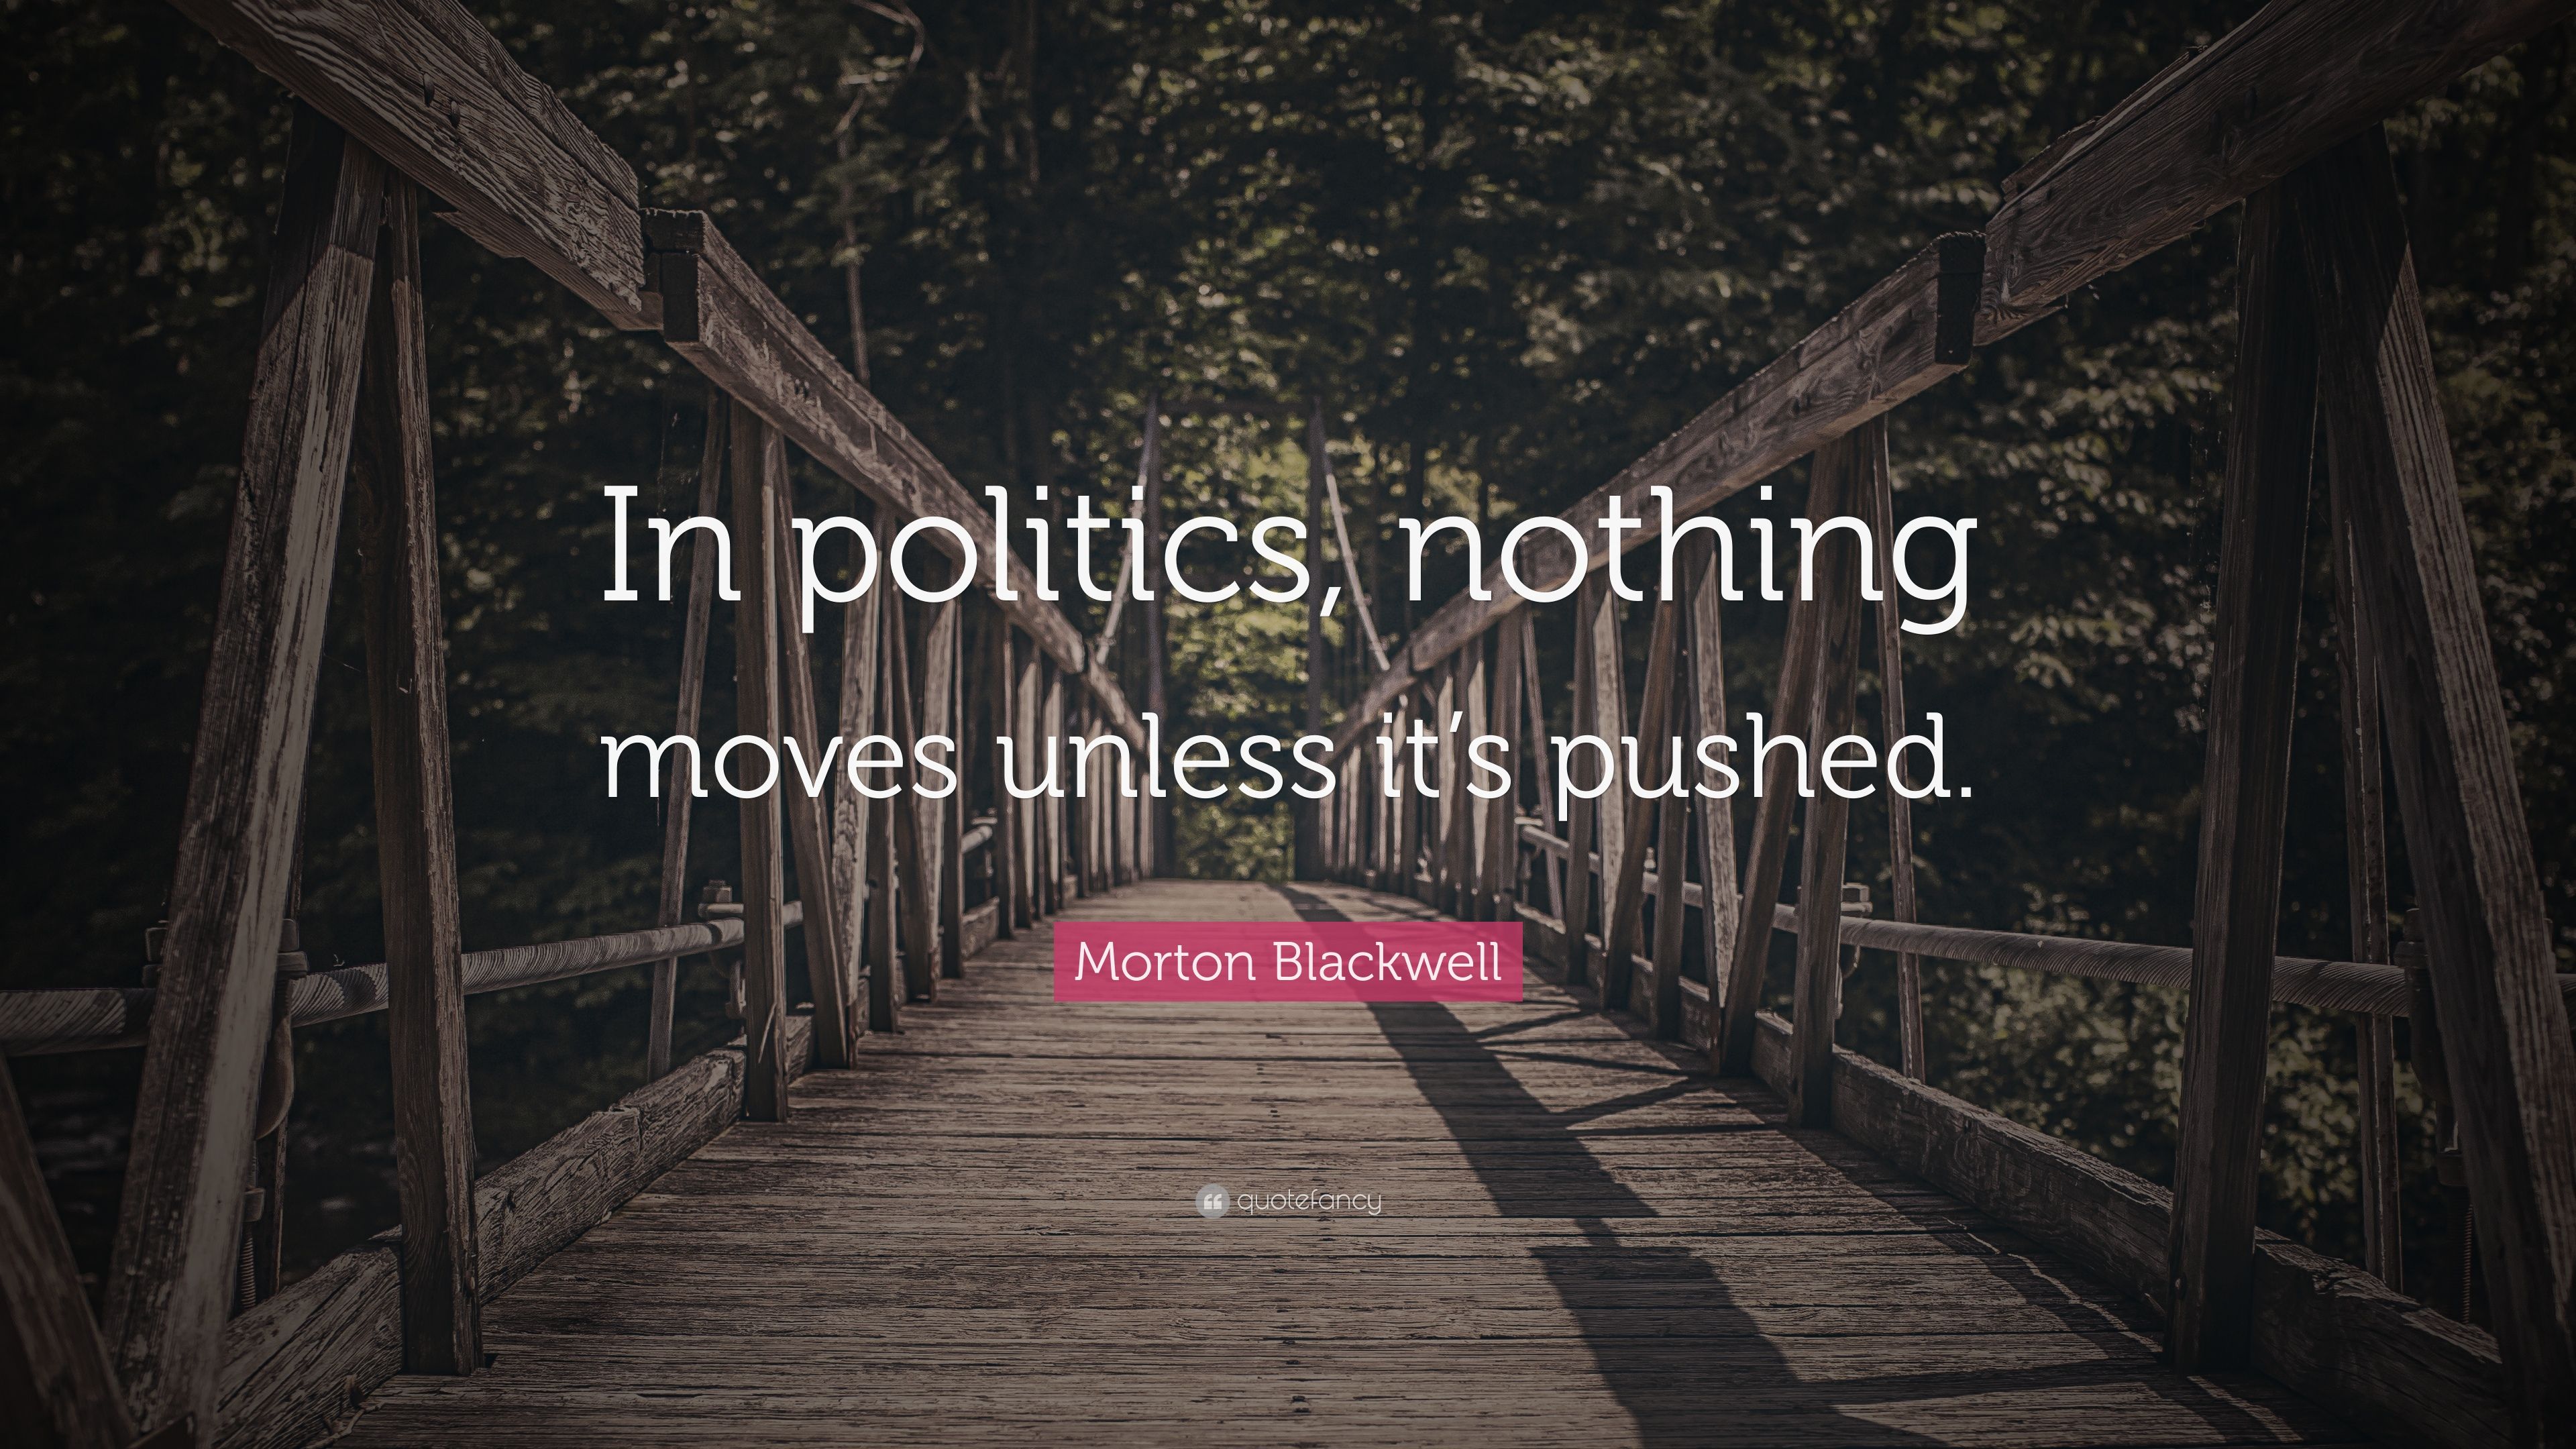 Morton Blackwell Quote: “In politics, nothing moves unless it's